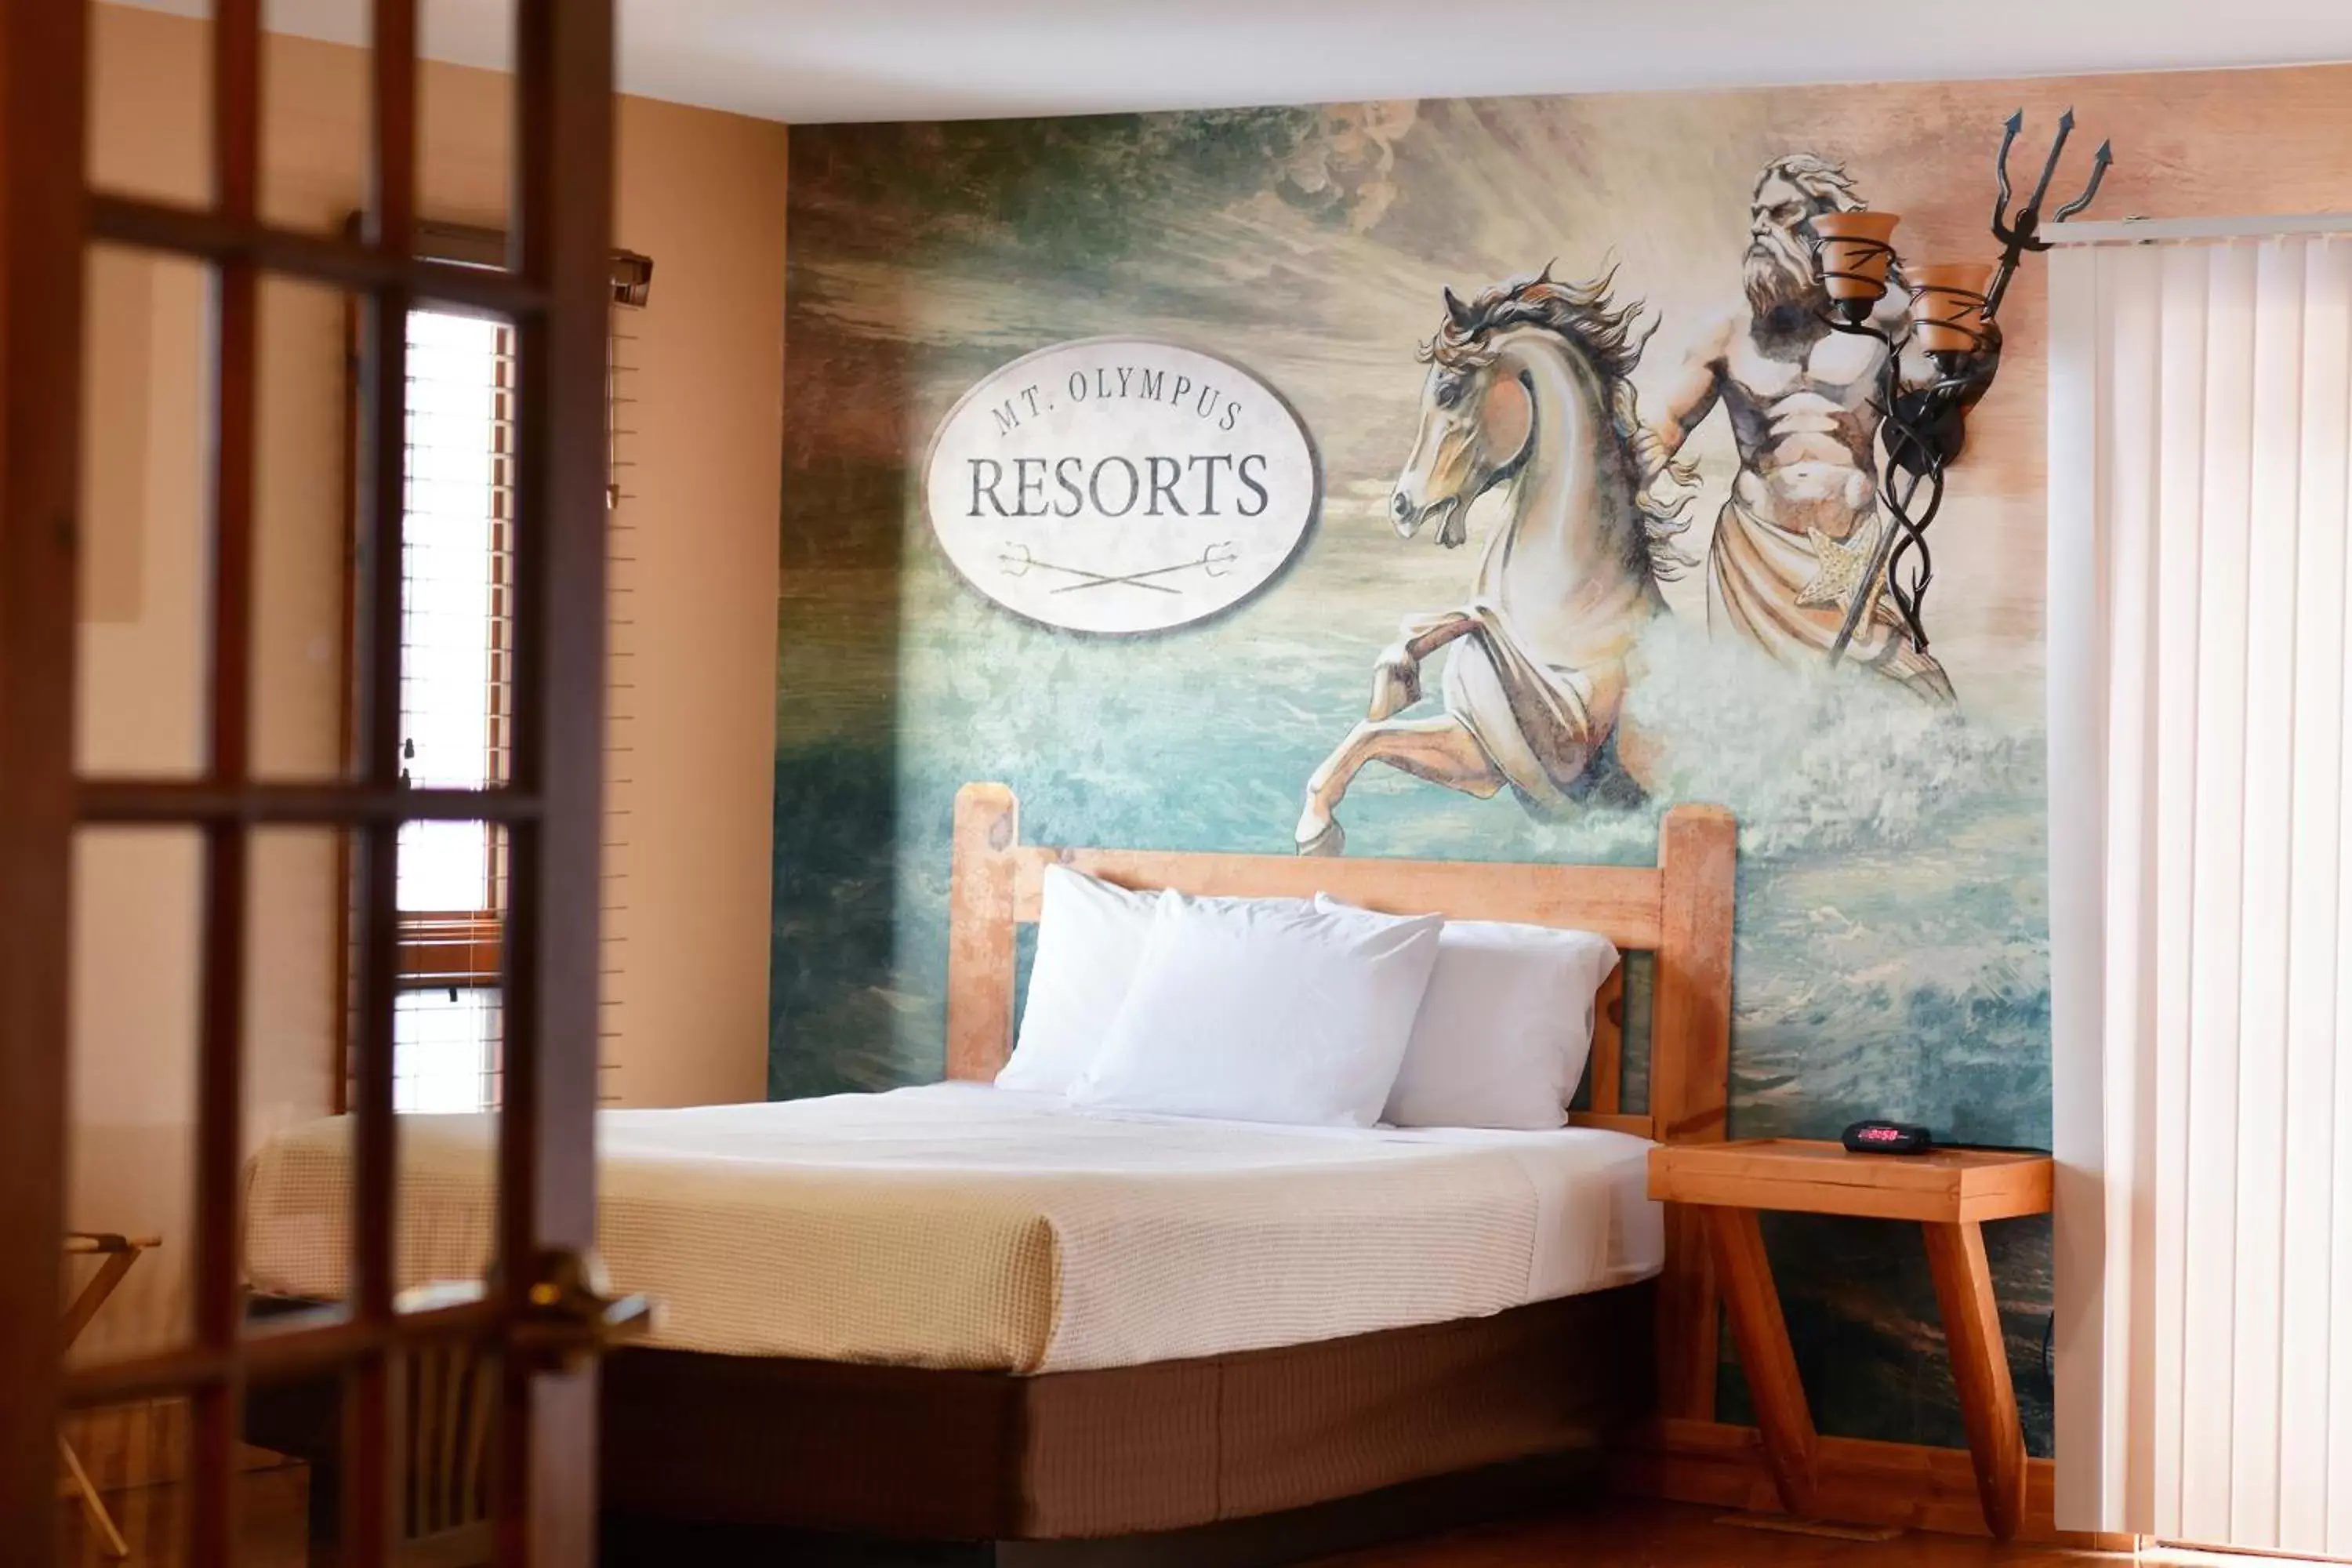 Bedroom in MT. OLYMPUS WATER PARK AND THEME PARK RESORT